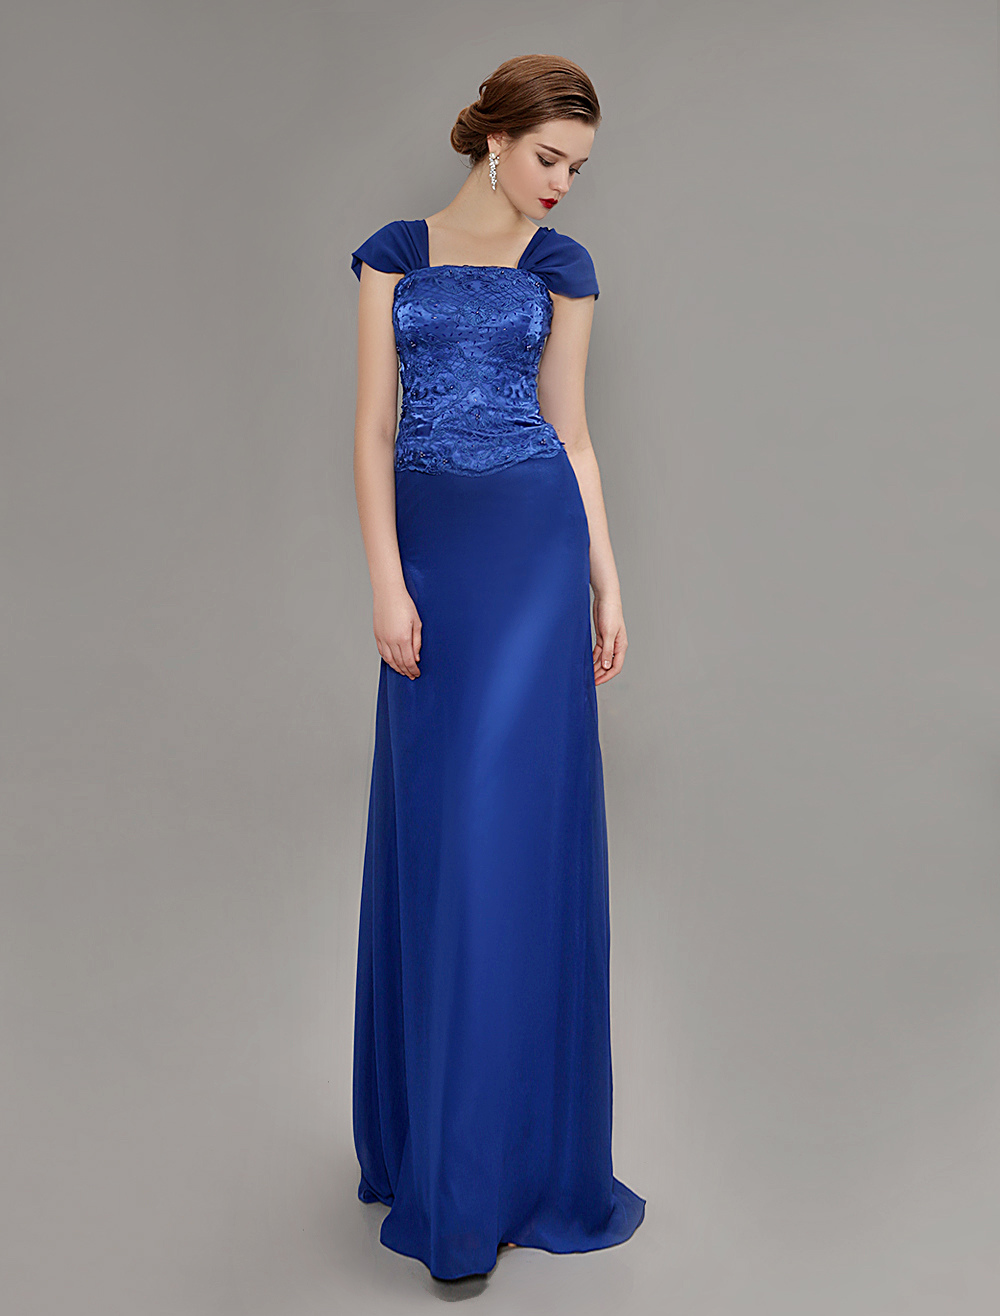 Royal Blue Chiffon Lace Mother Of Bride Dress With Train and Jacket ...